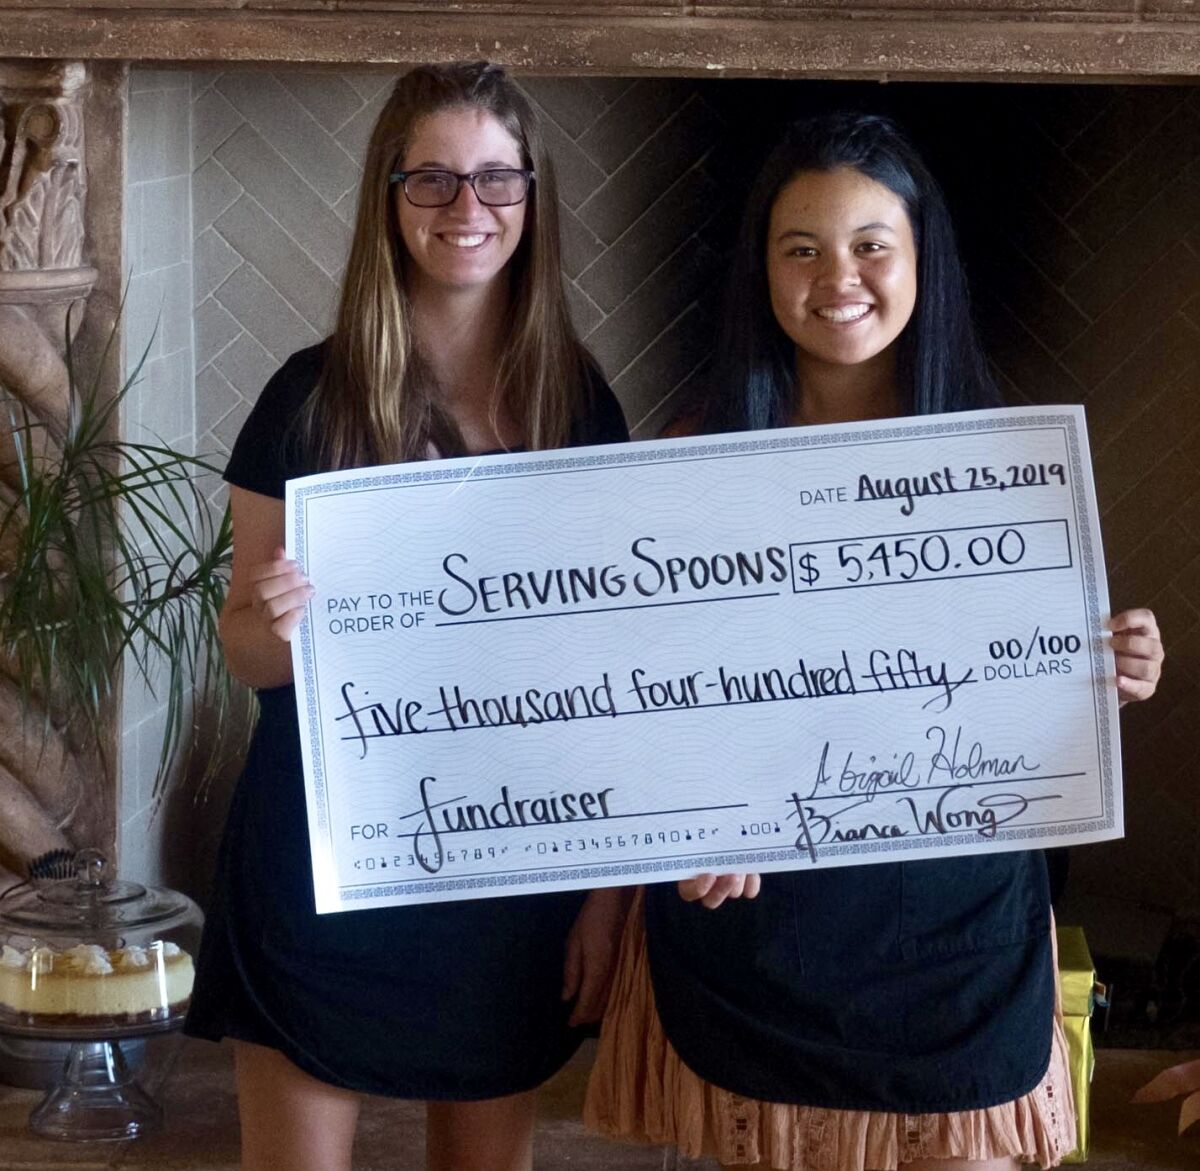 Serving Spoons President Abigail Holman and Vice President Bianca Wong are students at La Jolla Country Day School.